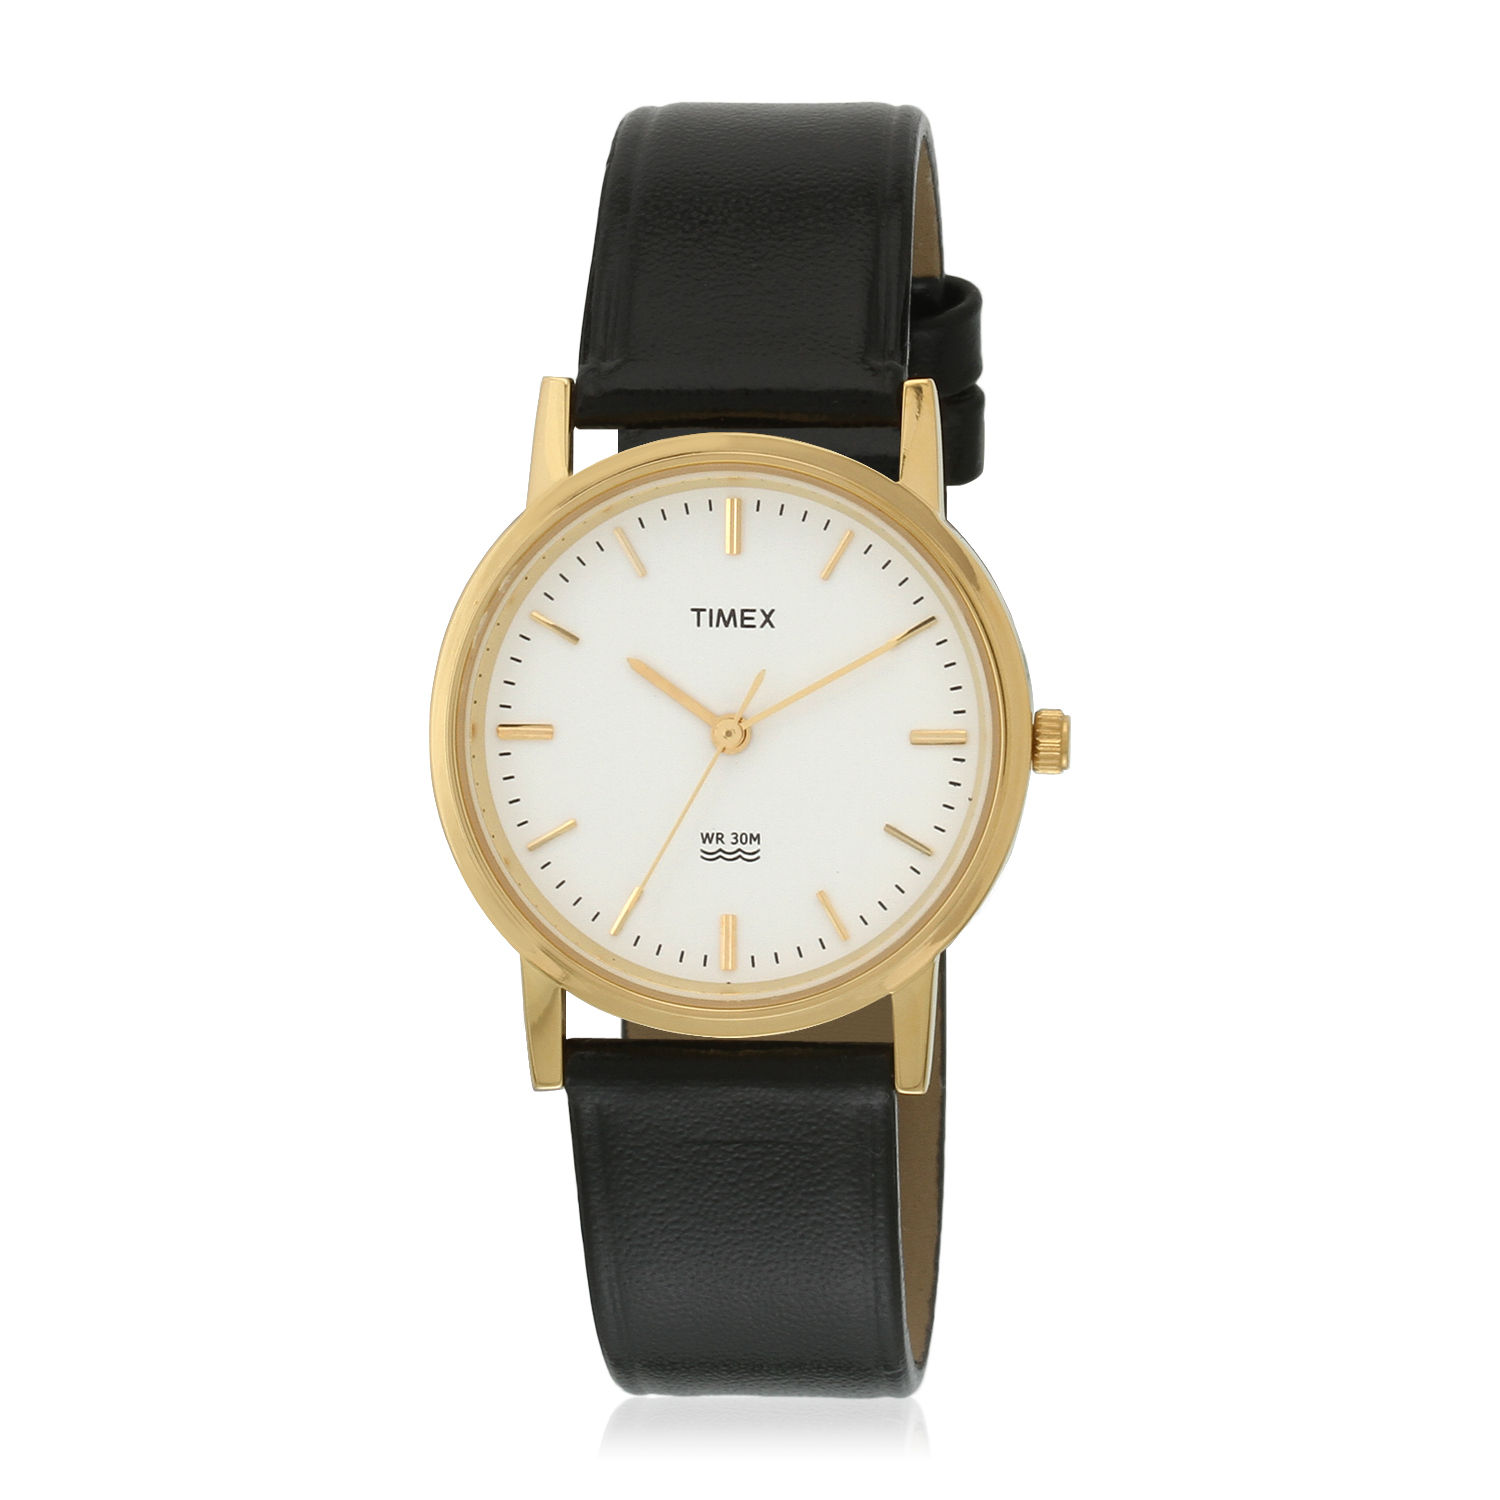 Timex Classics Analog White Dial Men's Watch (A300)